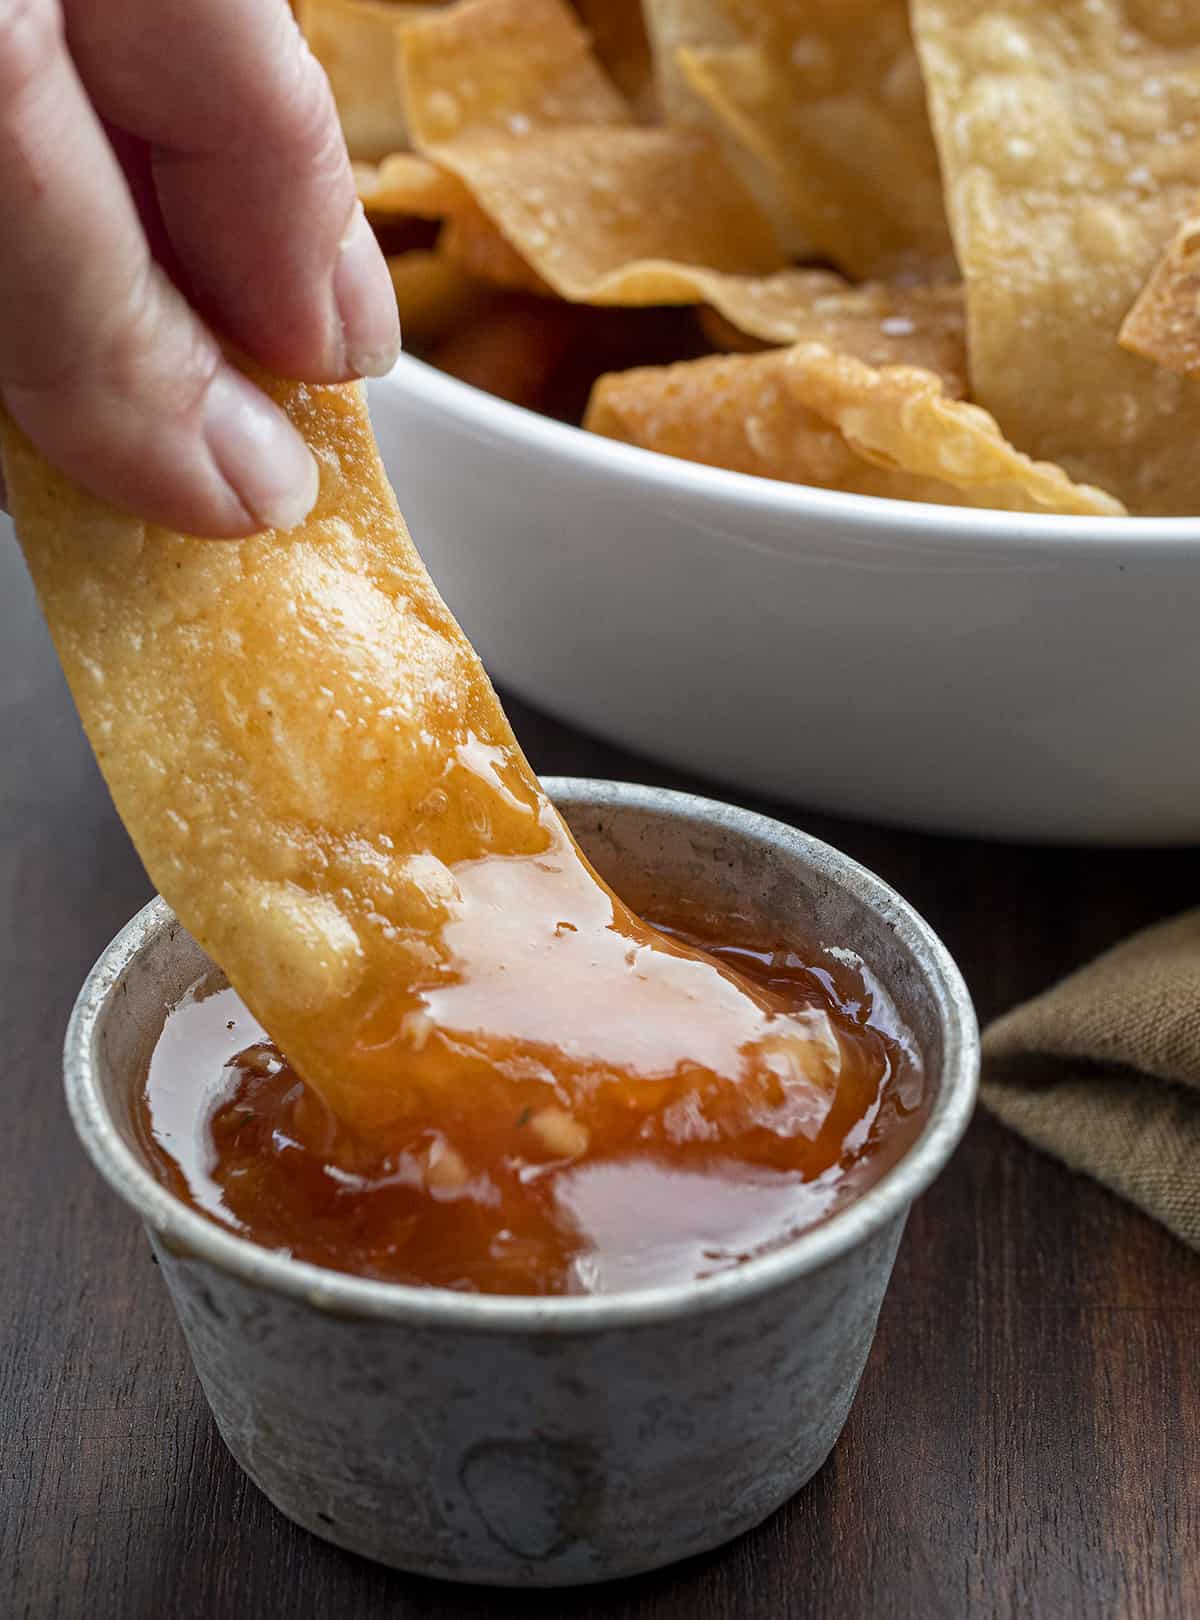 Dipping a Fried Wonton Chip into Sweet and Sour Suace. Wontons, Wonton Strips, Wonton Chips, Fried Wonton Chips, Oven Baked Wonton Chips, Crispy Wonton Chips, Fried Wontons, Asian Inspired Wonton Chips, recipes, i am homesteader, iamhomesteader